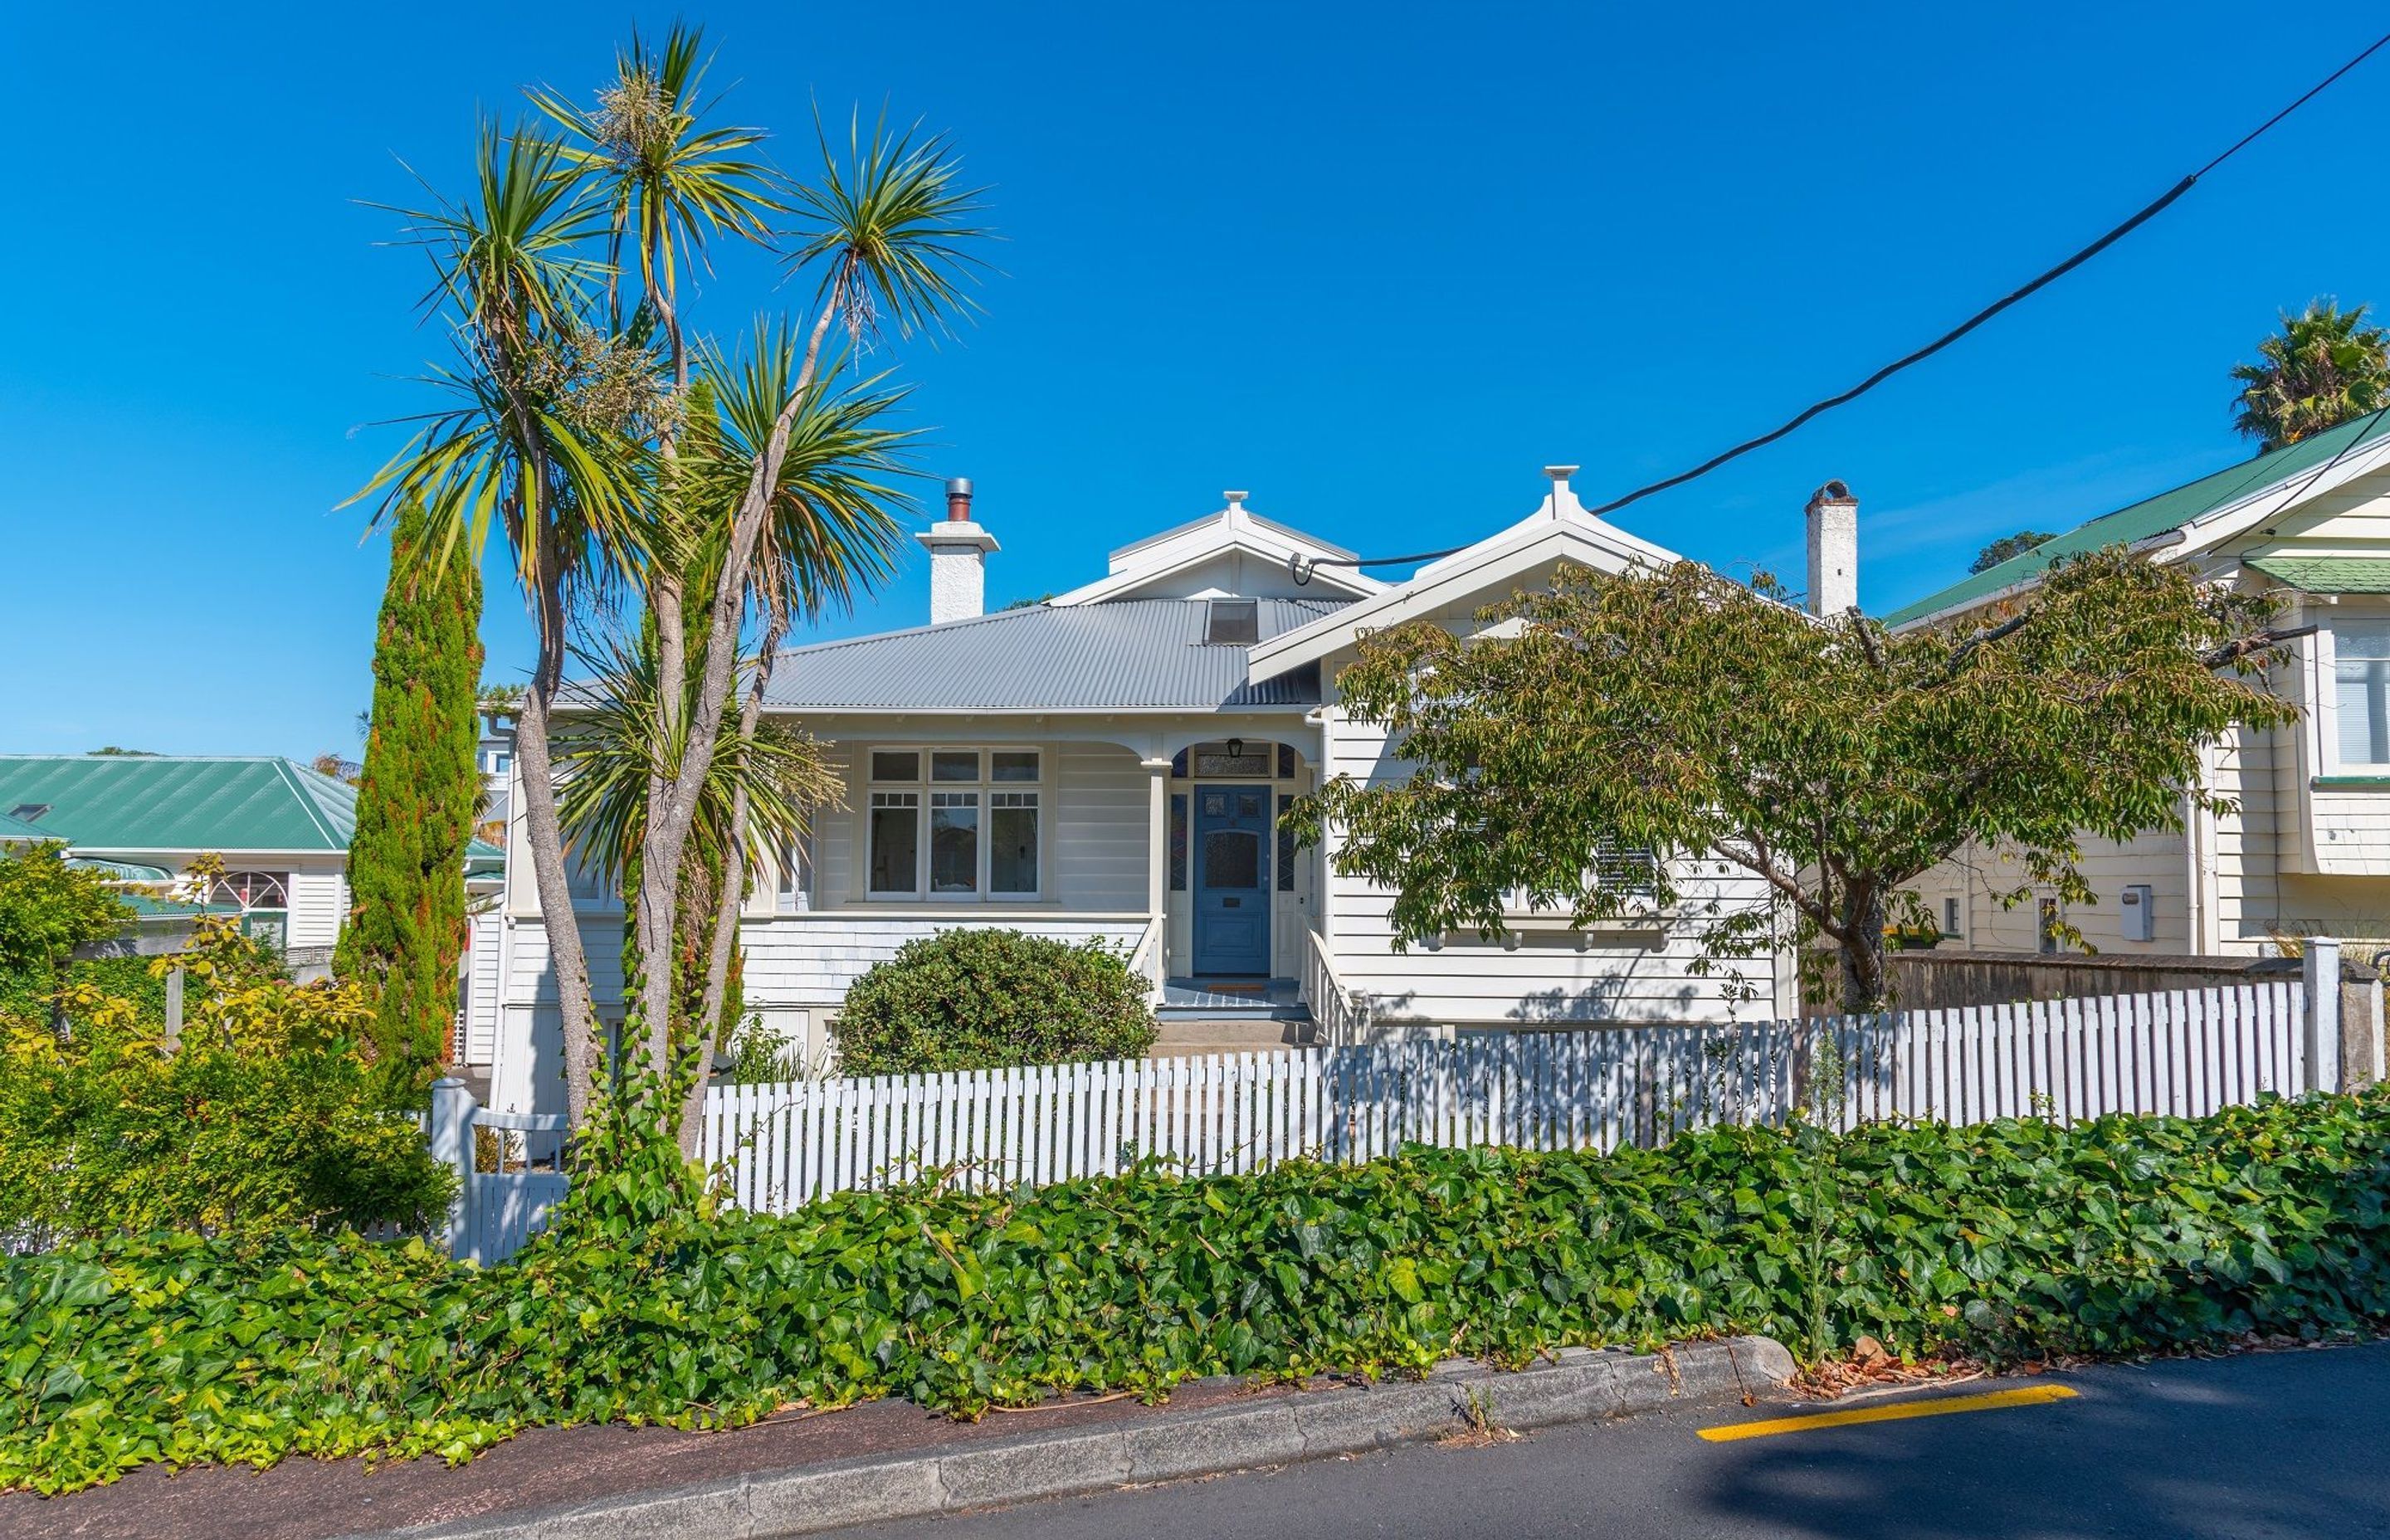 The 5 Types of Auckland Villas